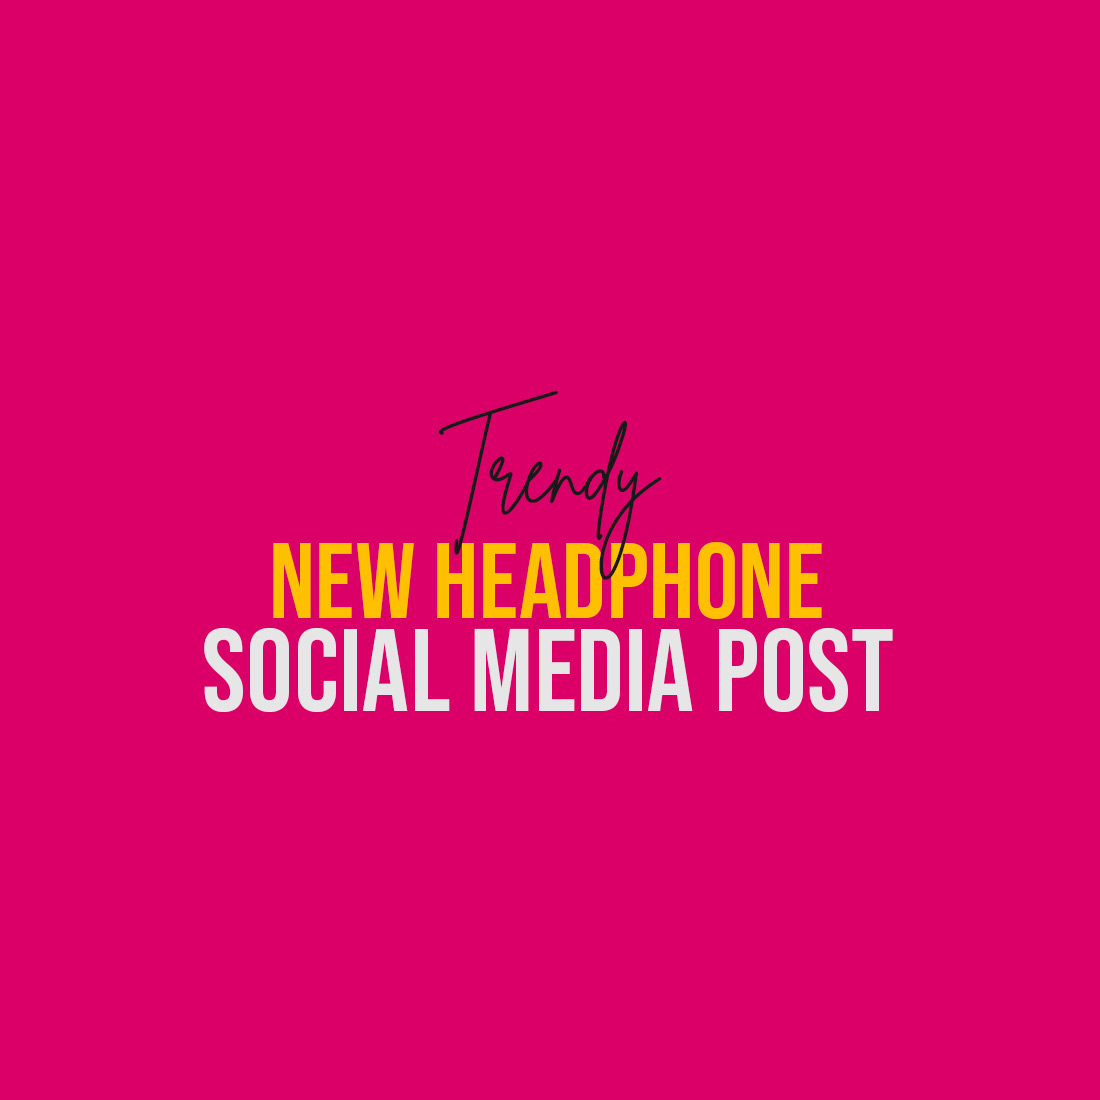 New headphone social media templates or web banner- only $4 preview image.